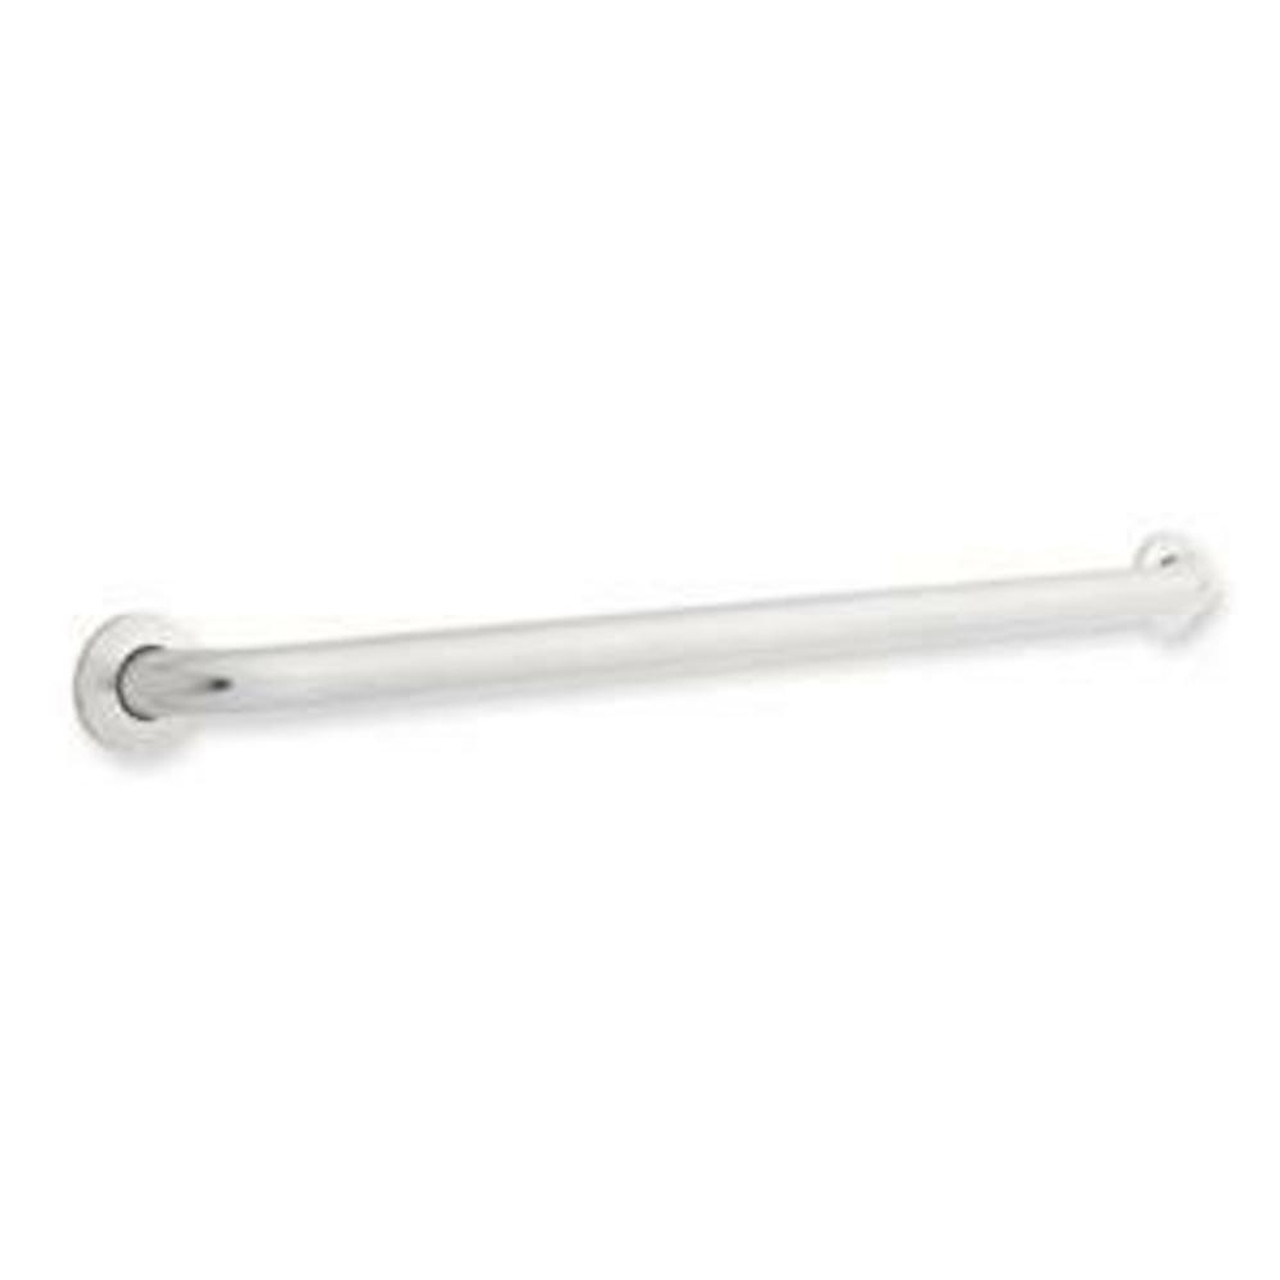 Safety First 5736 36" Grab Bar Concealed MountStainless Steel 1 1/4" OD